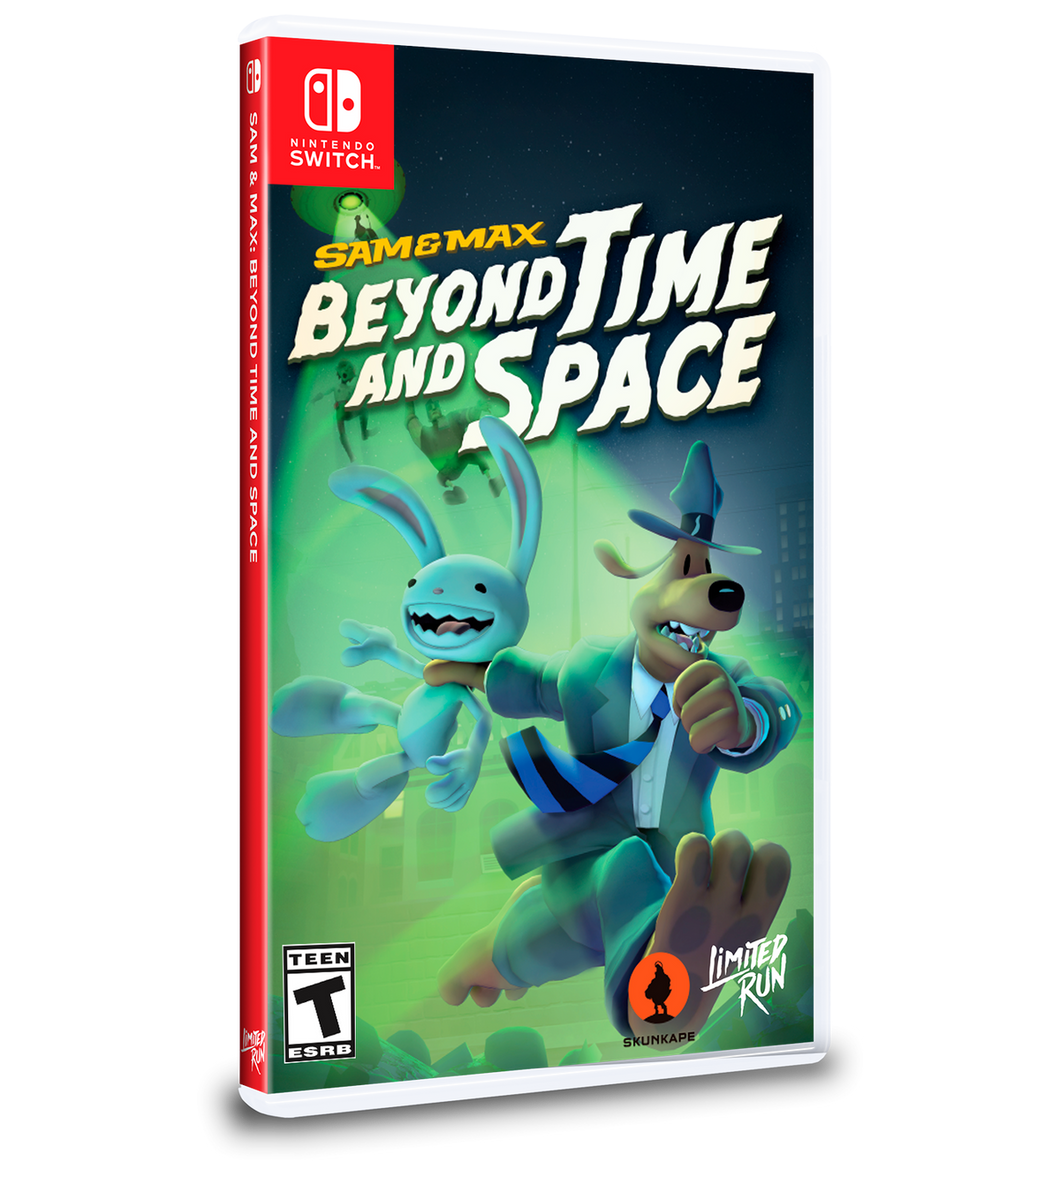 Sam & Max Beyond time & space / Limited run games / Switch